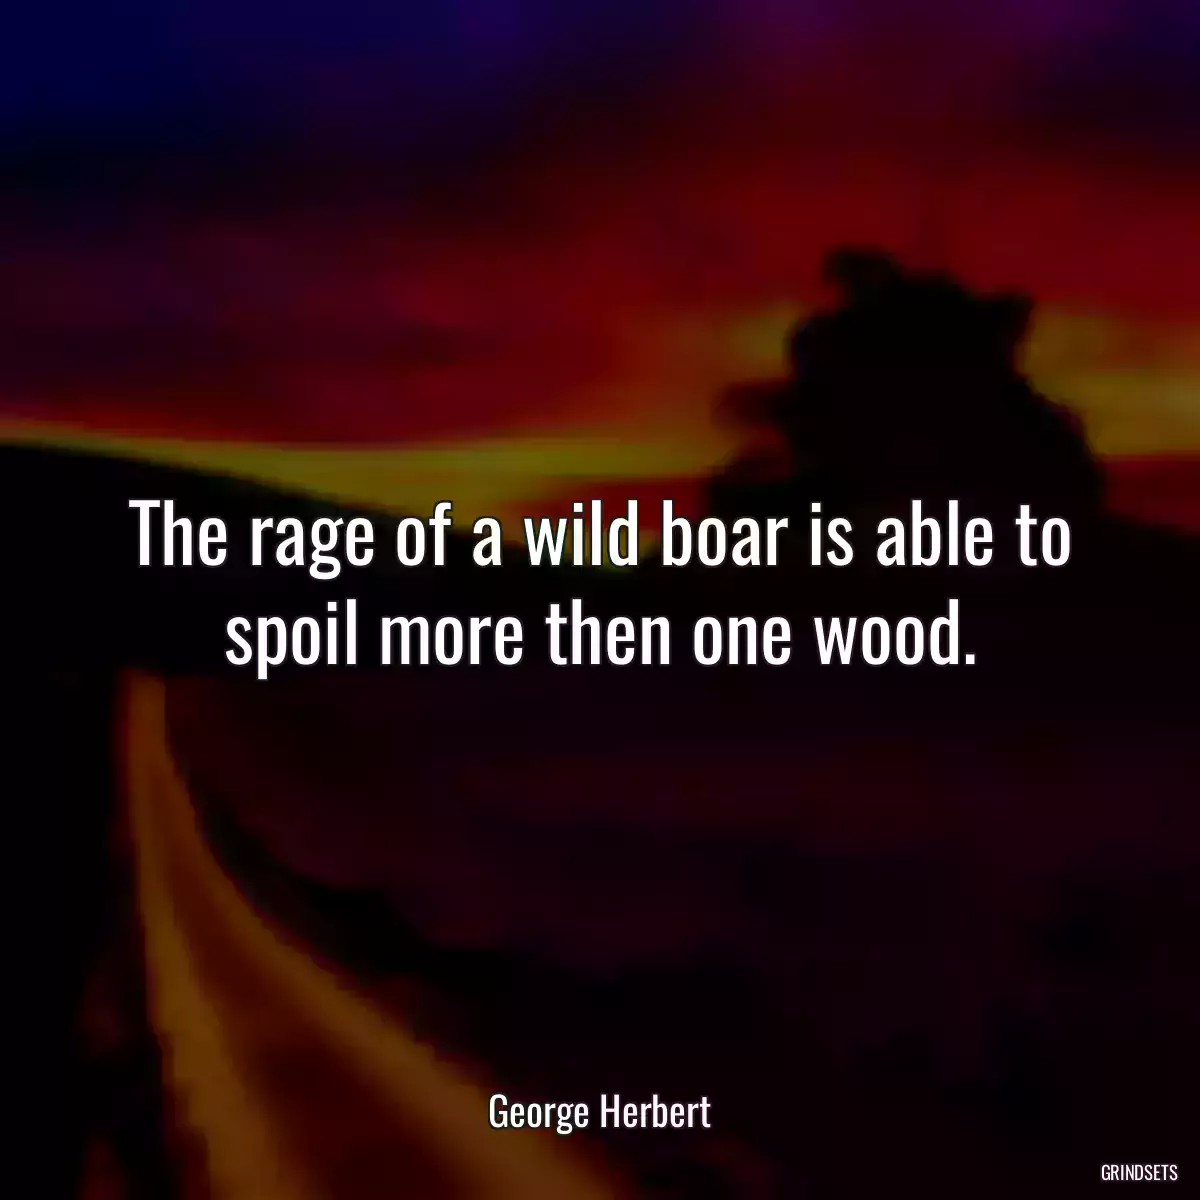 The rage of a wild boar is able to spoil more then one wood.